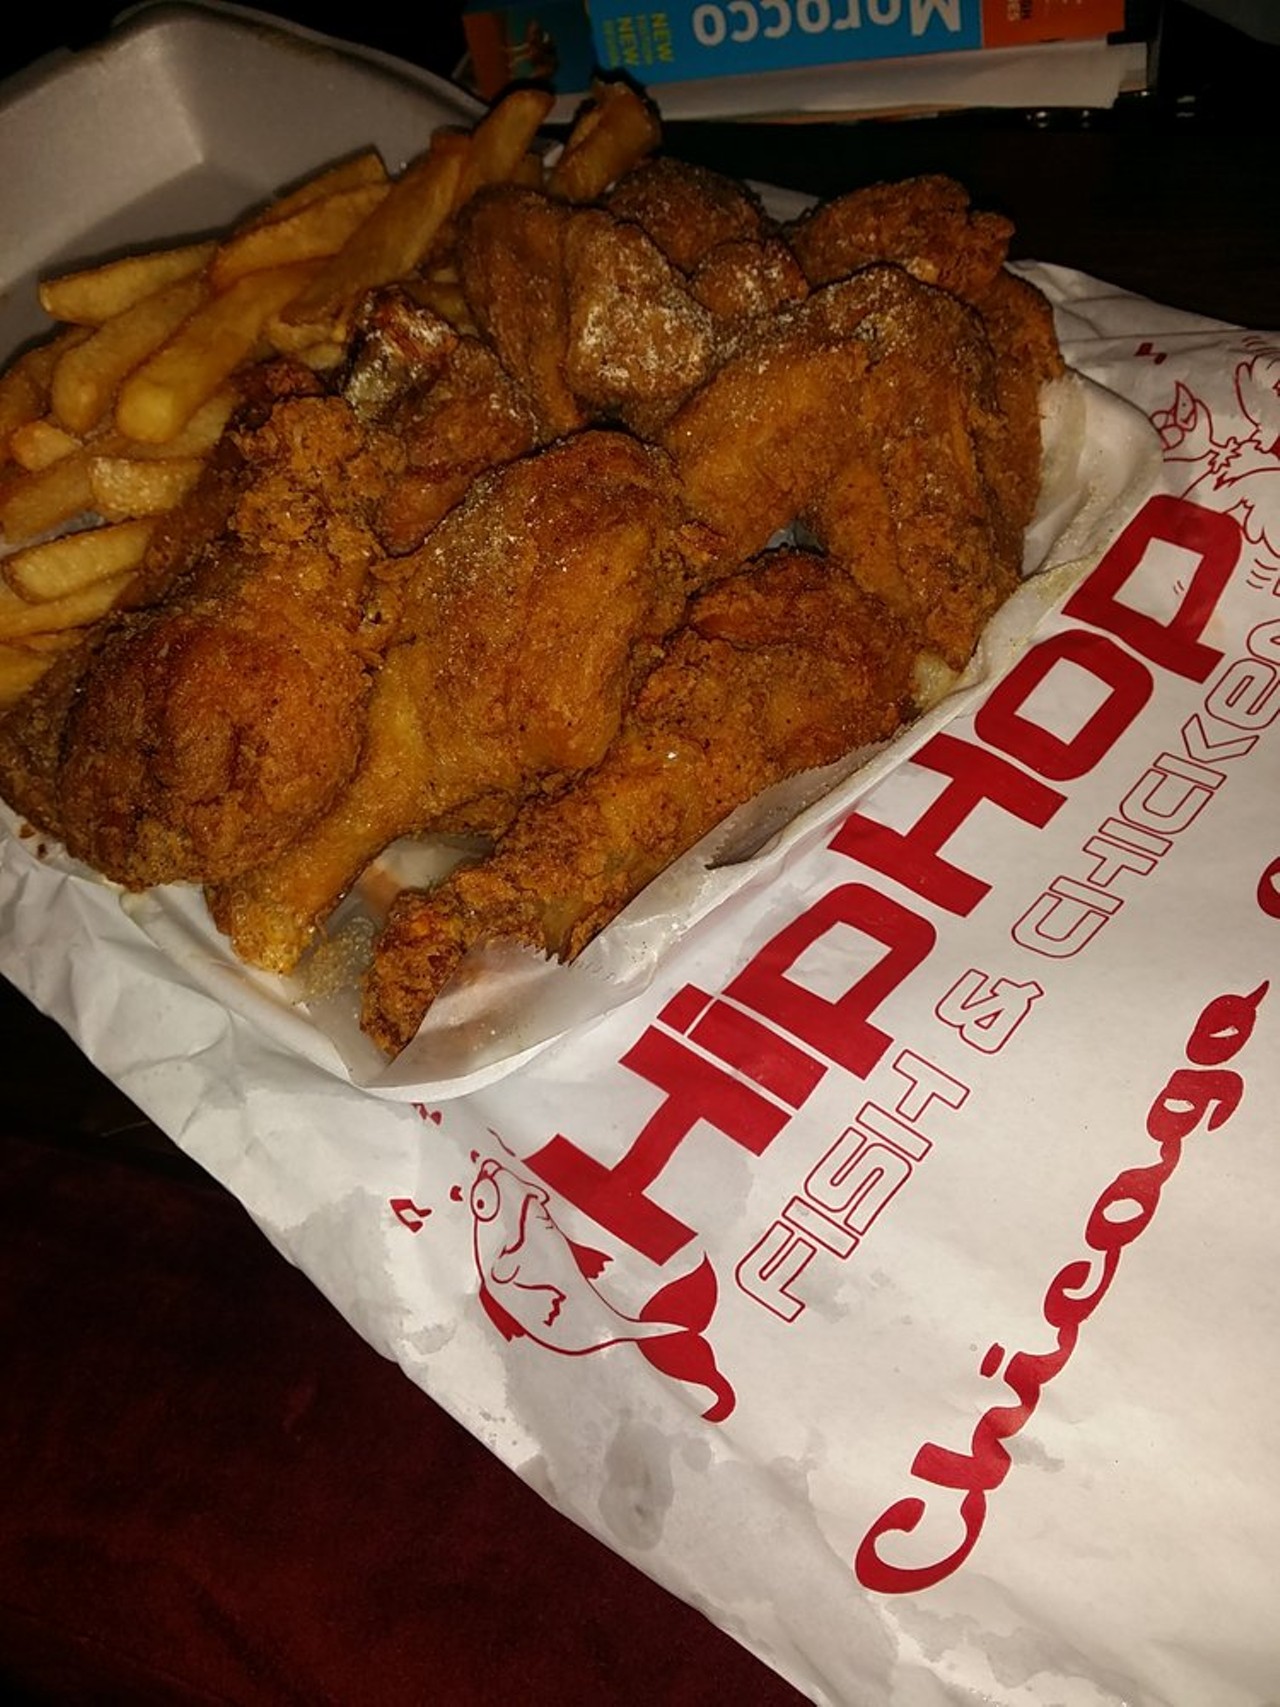 Hip Hop Fish & Chicken - Hip-Hop Fish and Chicken serves up fast food to the state of Maryland, with 33 locations. It was established in 2009 in Randallstown, Maryland.